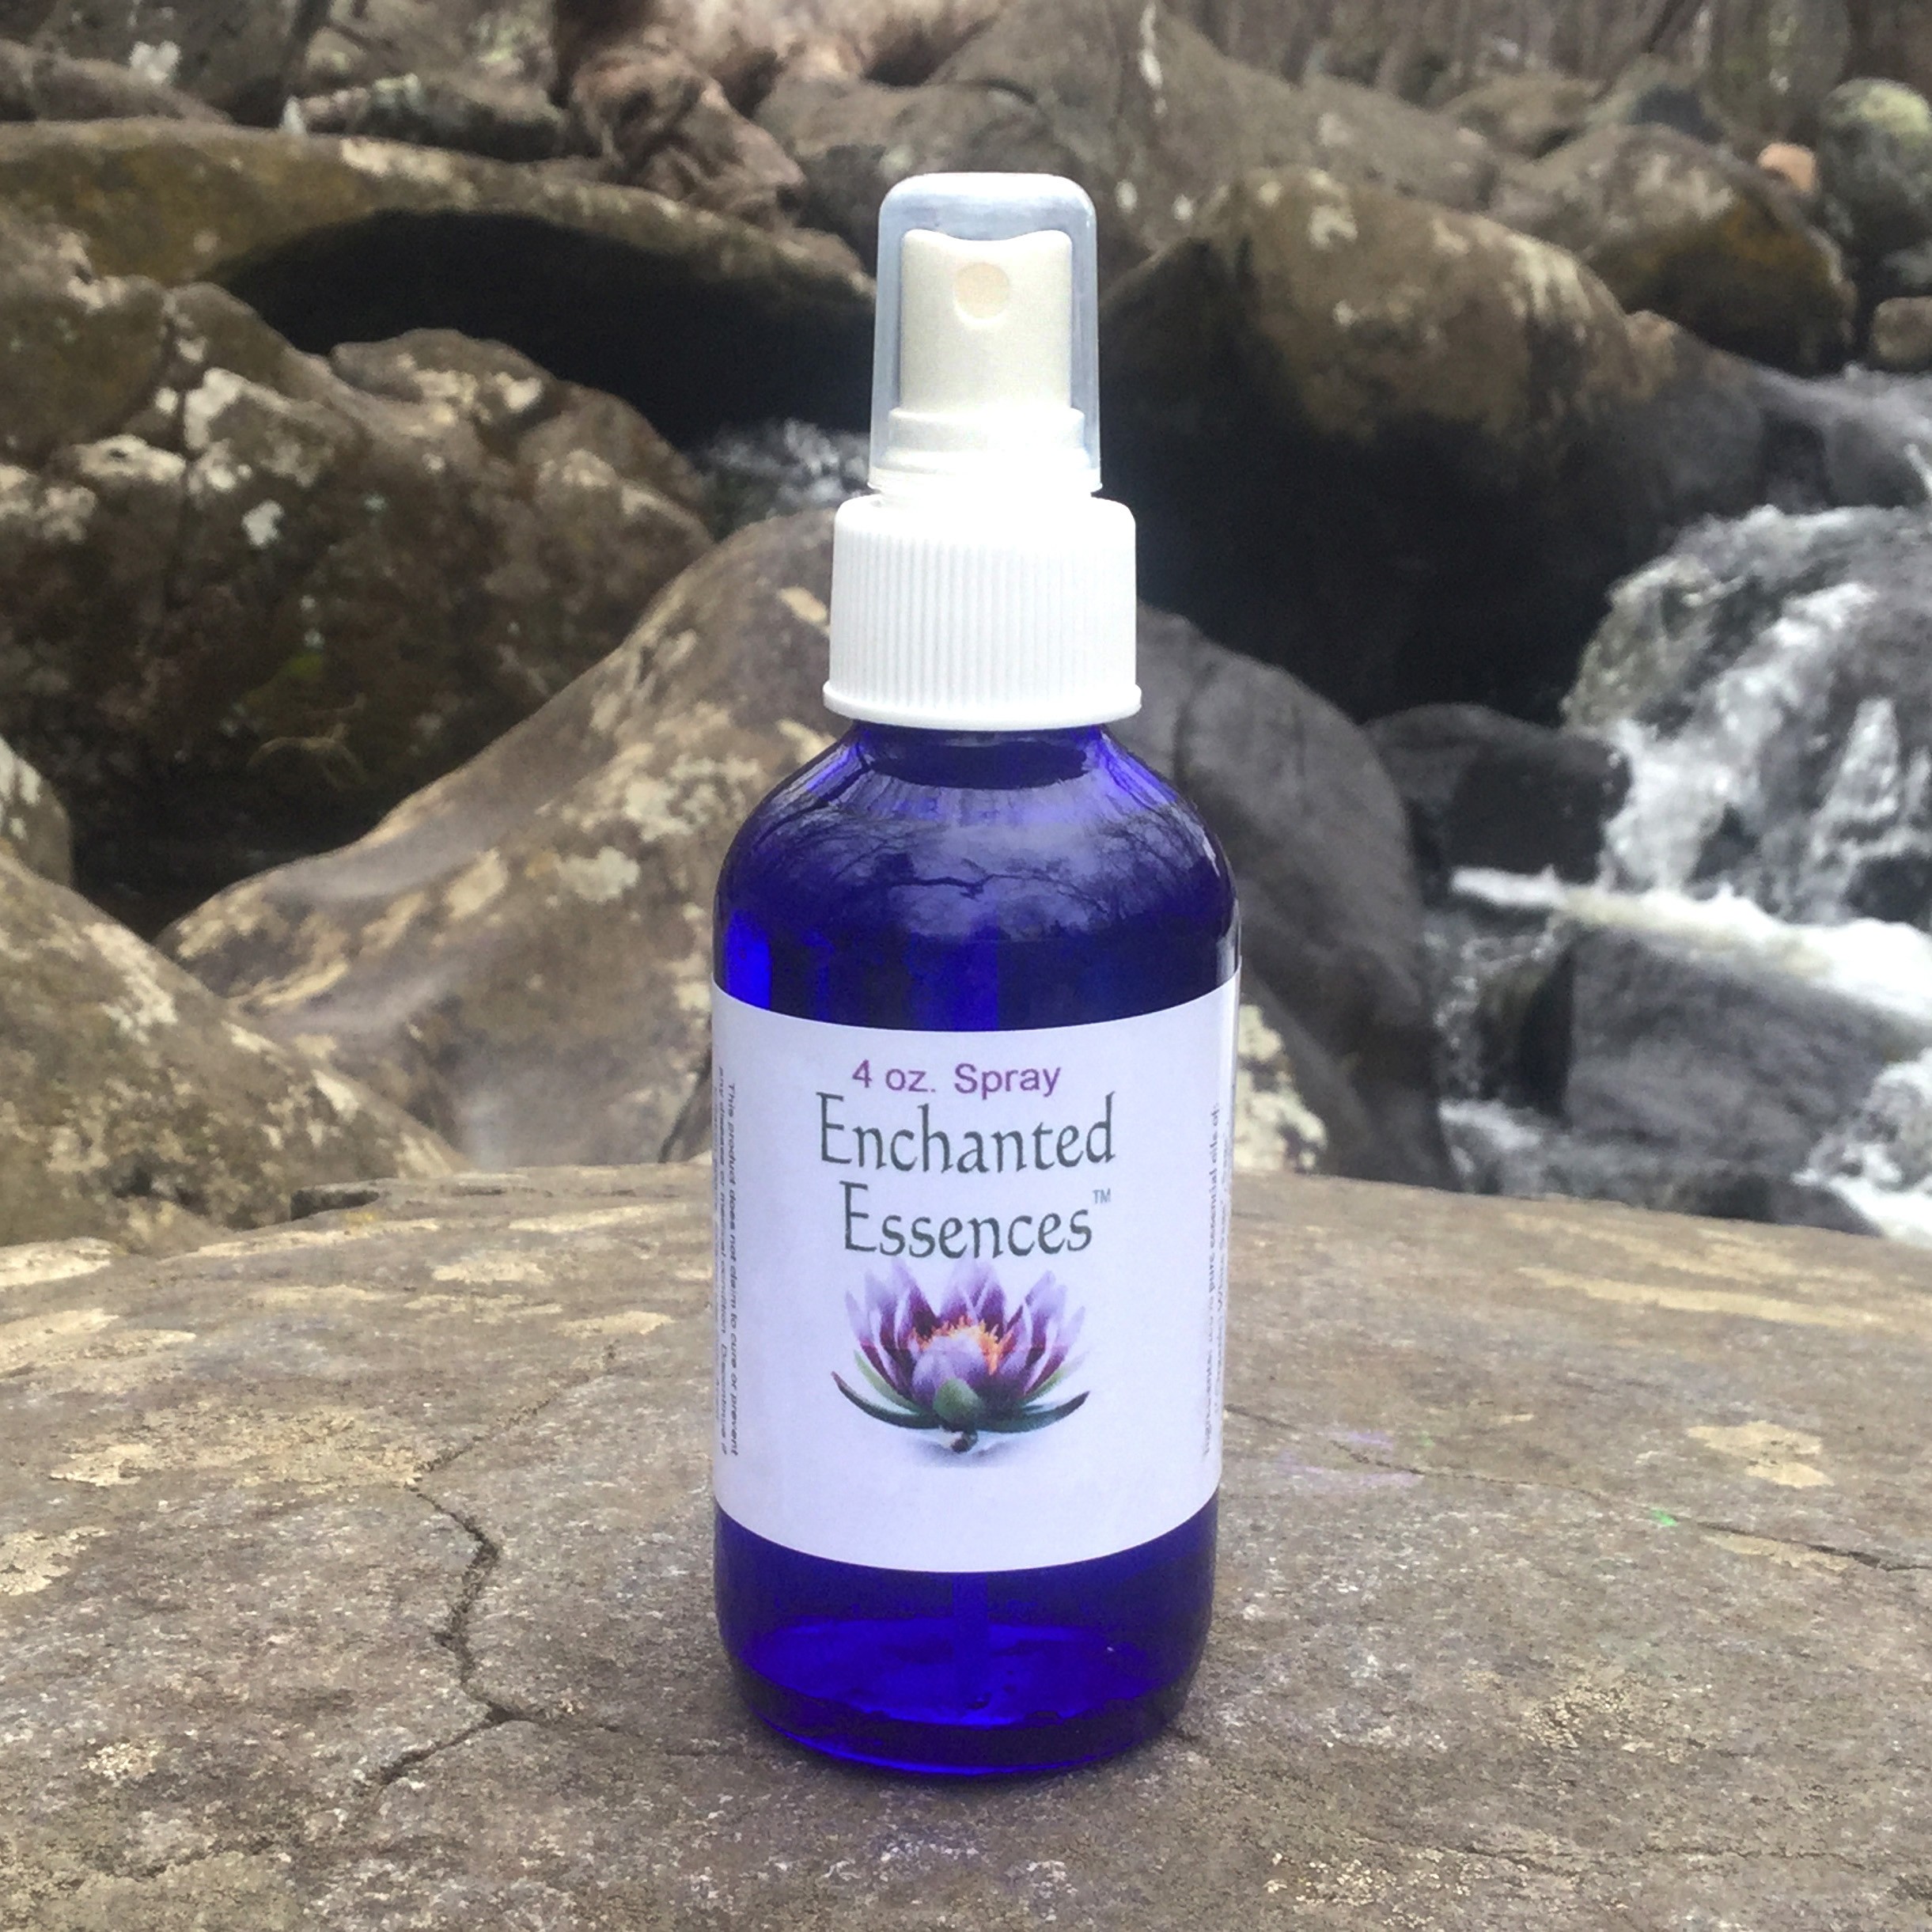 Ancient Blessings spray mist: $6 for 2oz. or $12 for 4oz.